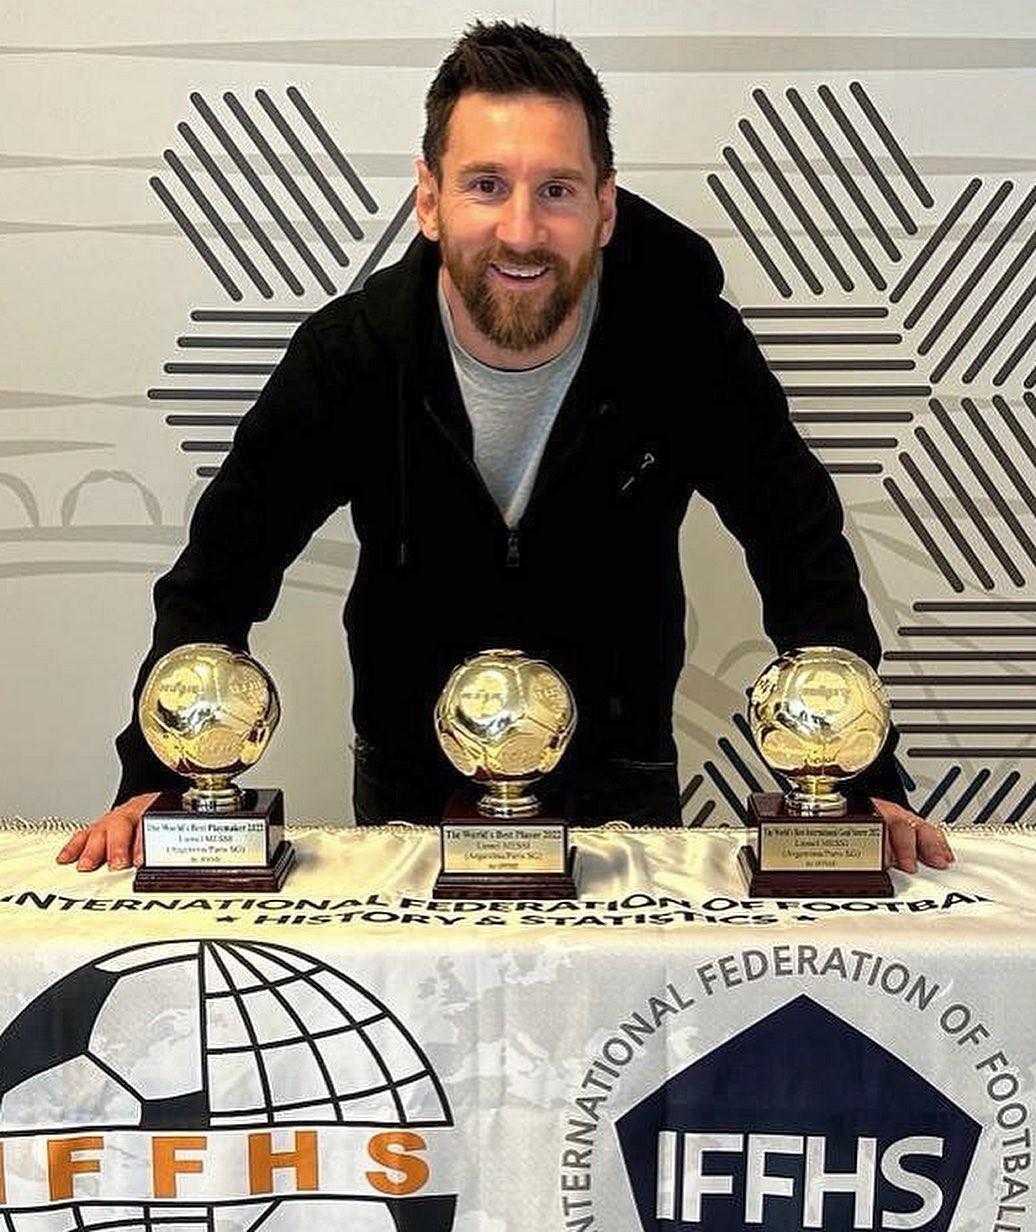 MessivsRonaldo.app on X: 4️⃣ IFFHS 📈 One of the IFFHS's countless annual  awards is for the Strongest League in the World, for which they produce a  full set of global league rankings.